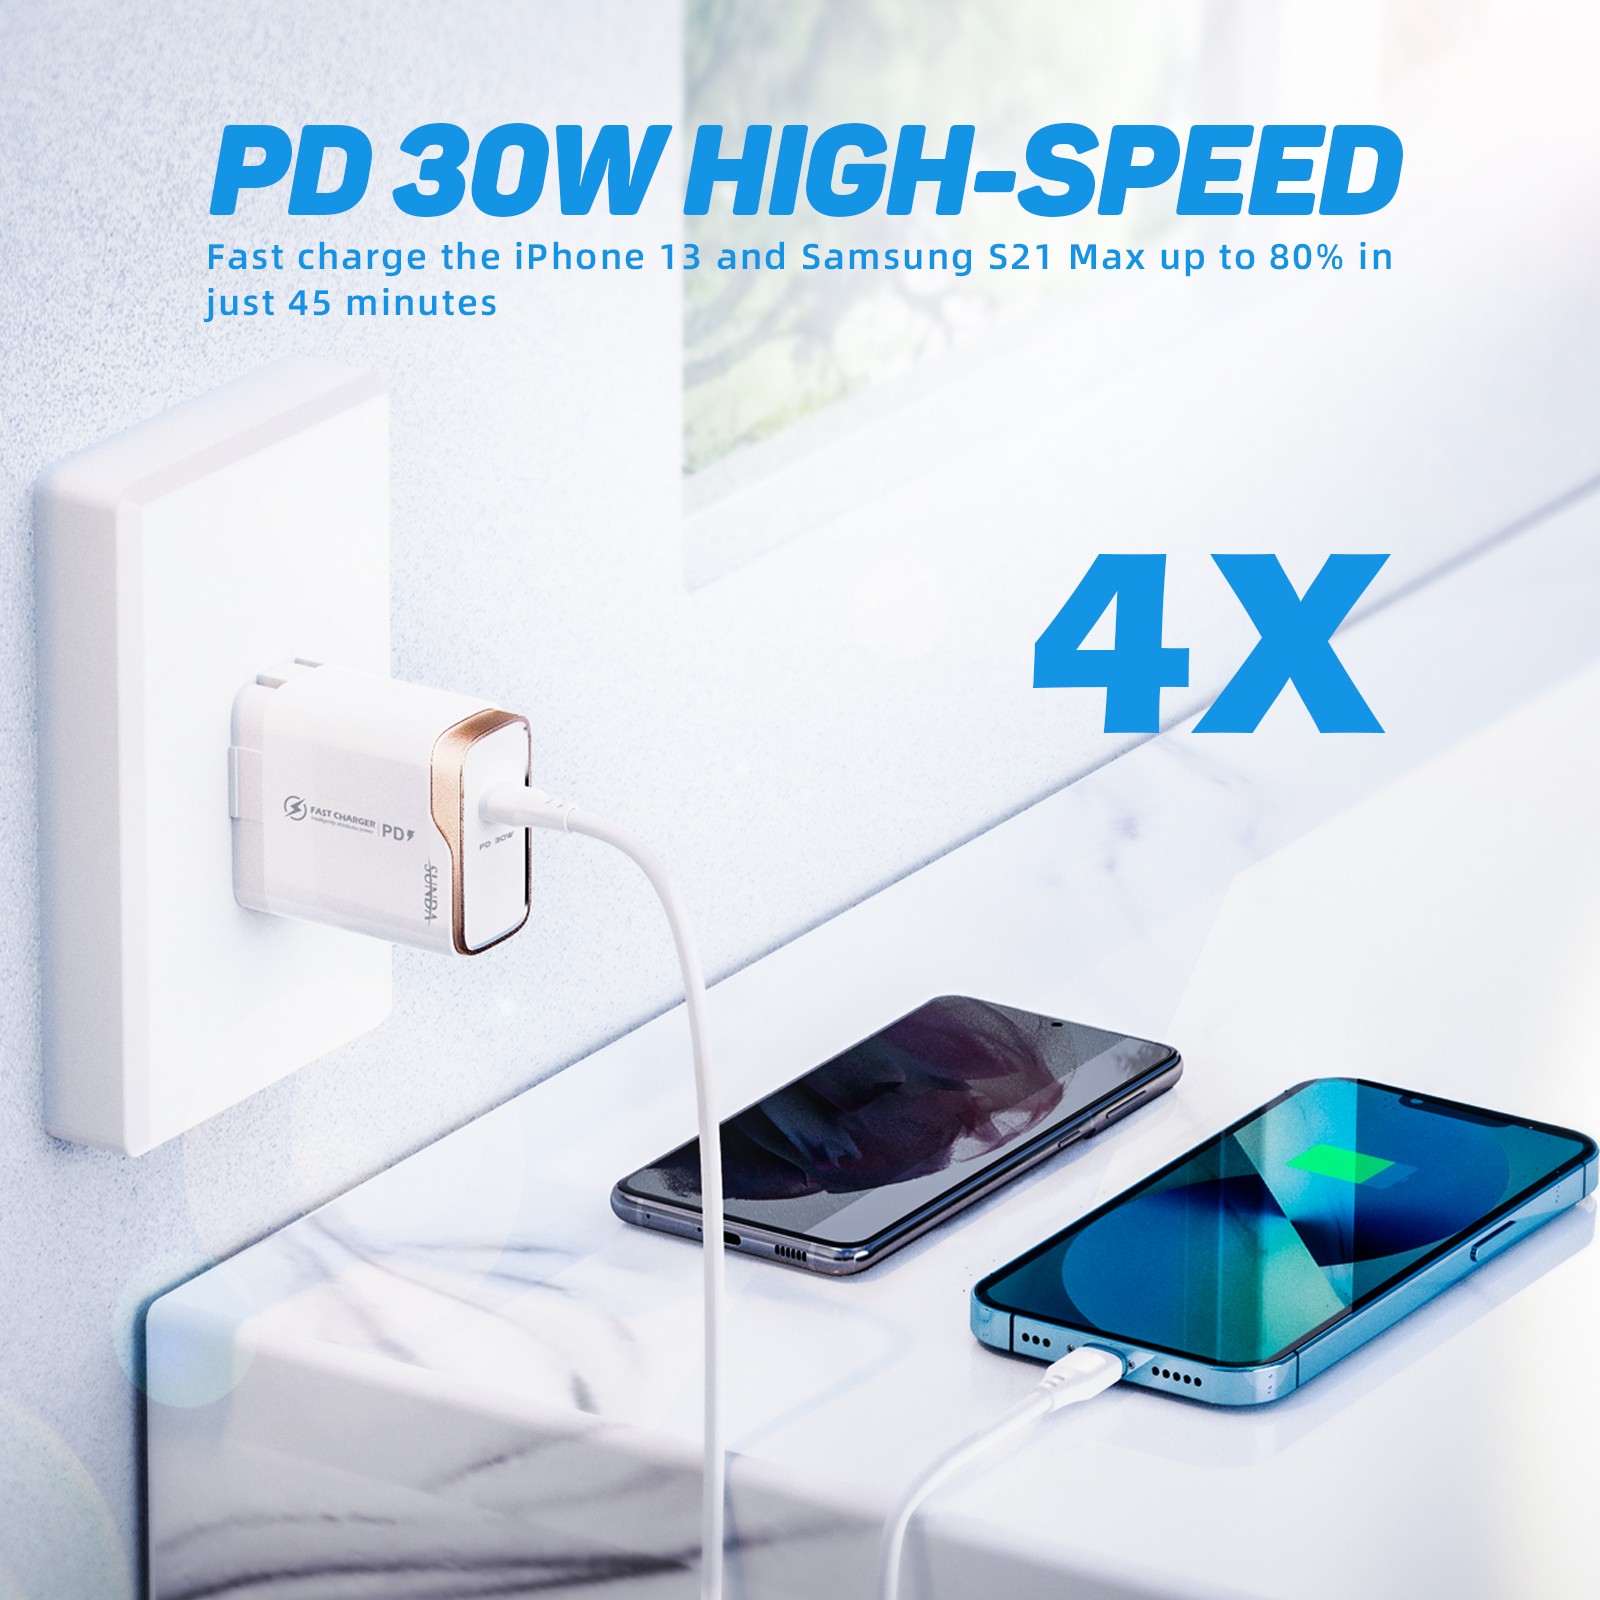 PD30W Newest Design Privite Mold Single Type C Fast Wall Charger